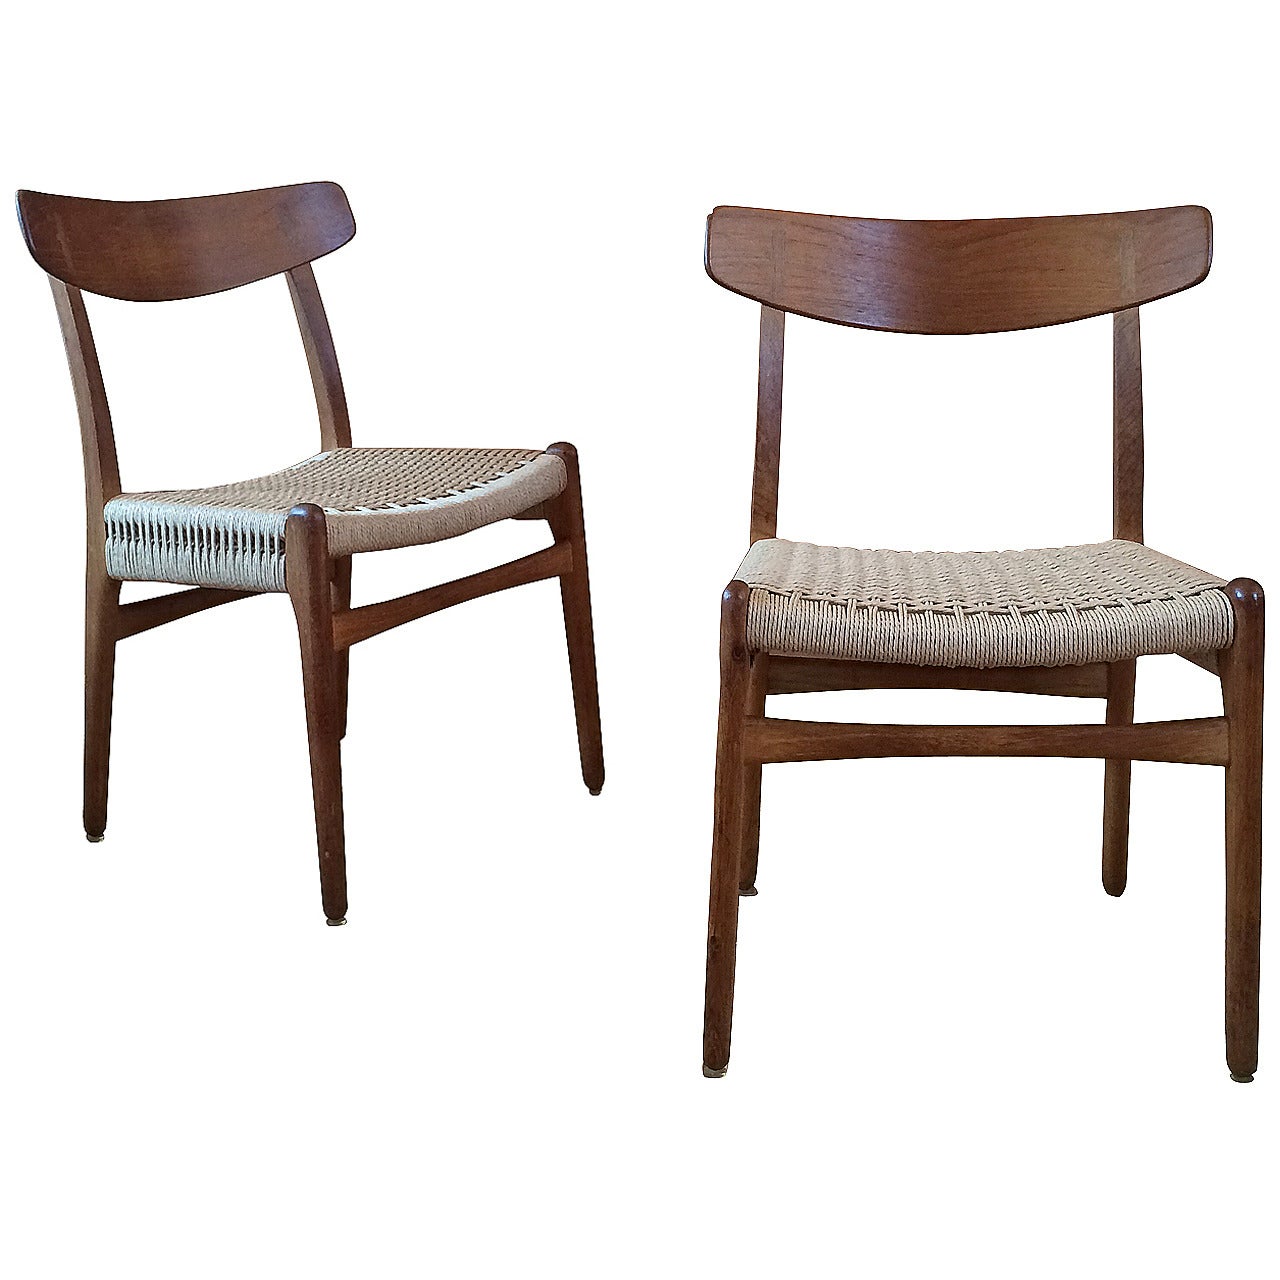 Museum Quality Hans Wegner Chairs in Oak and Paper Cord, 1950